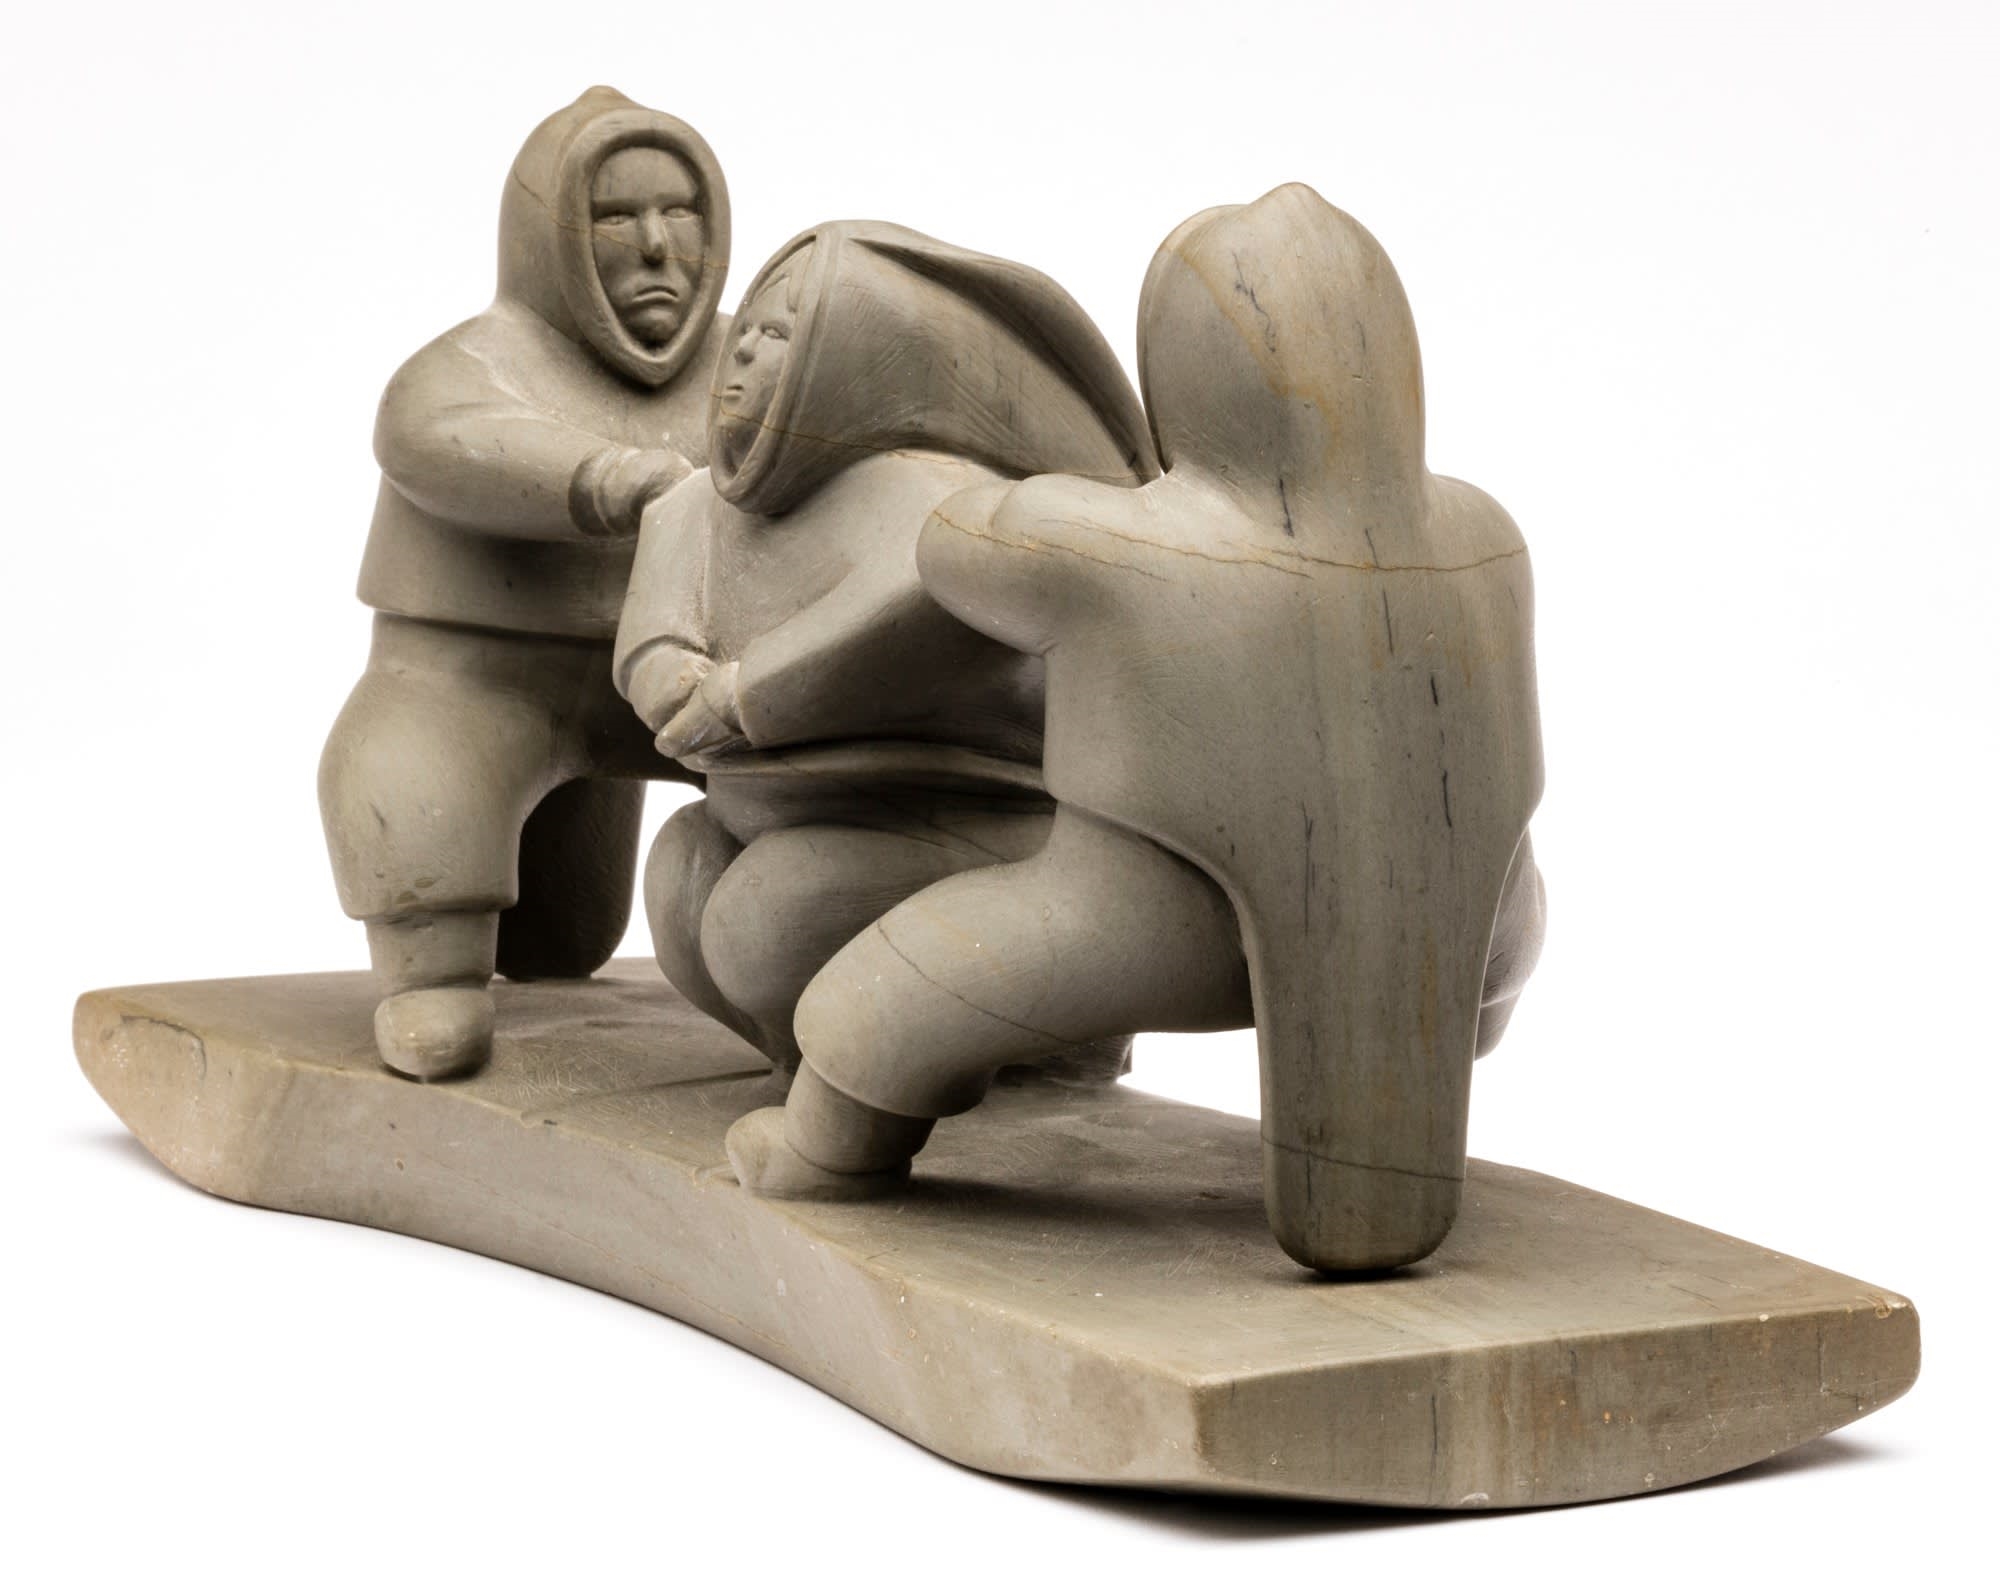 Artwork by Victor Ekootak, Fighting over a Woman, Made of stone